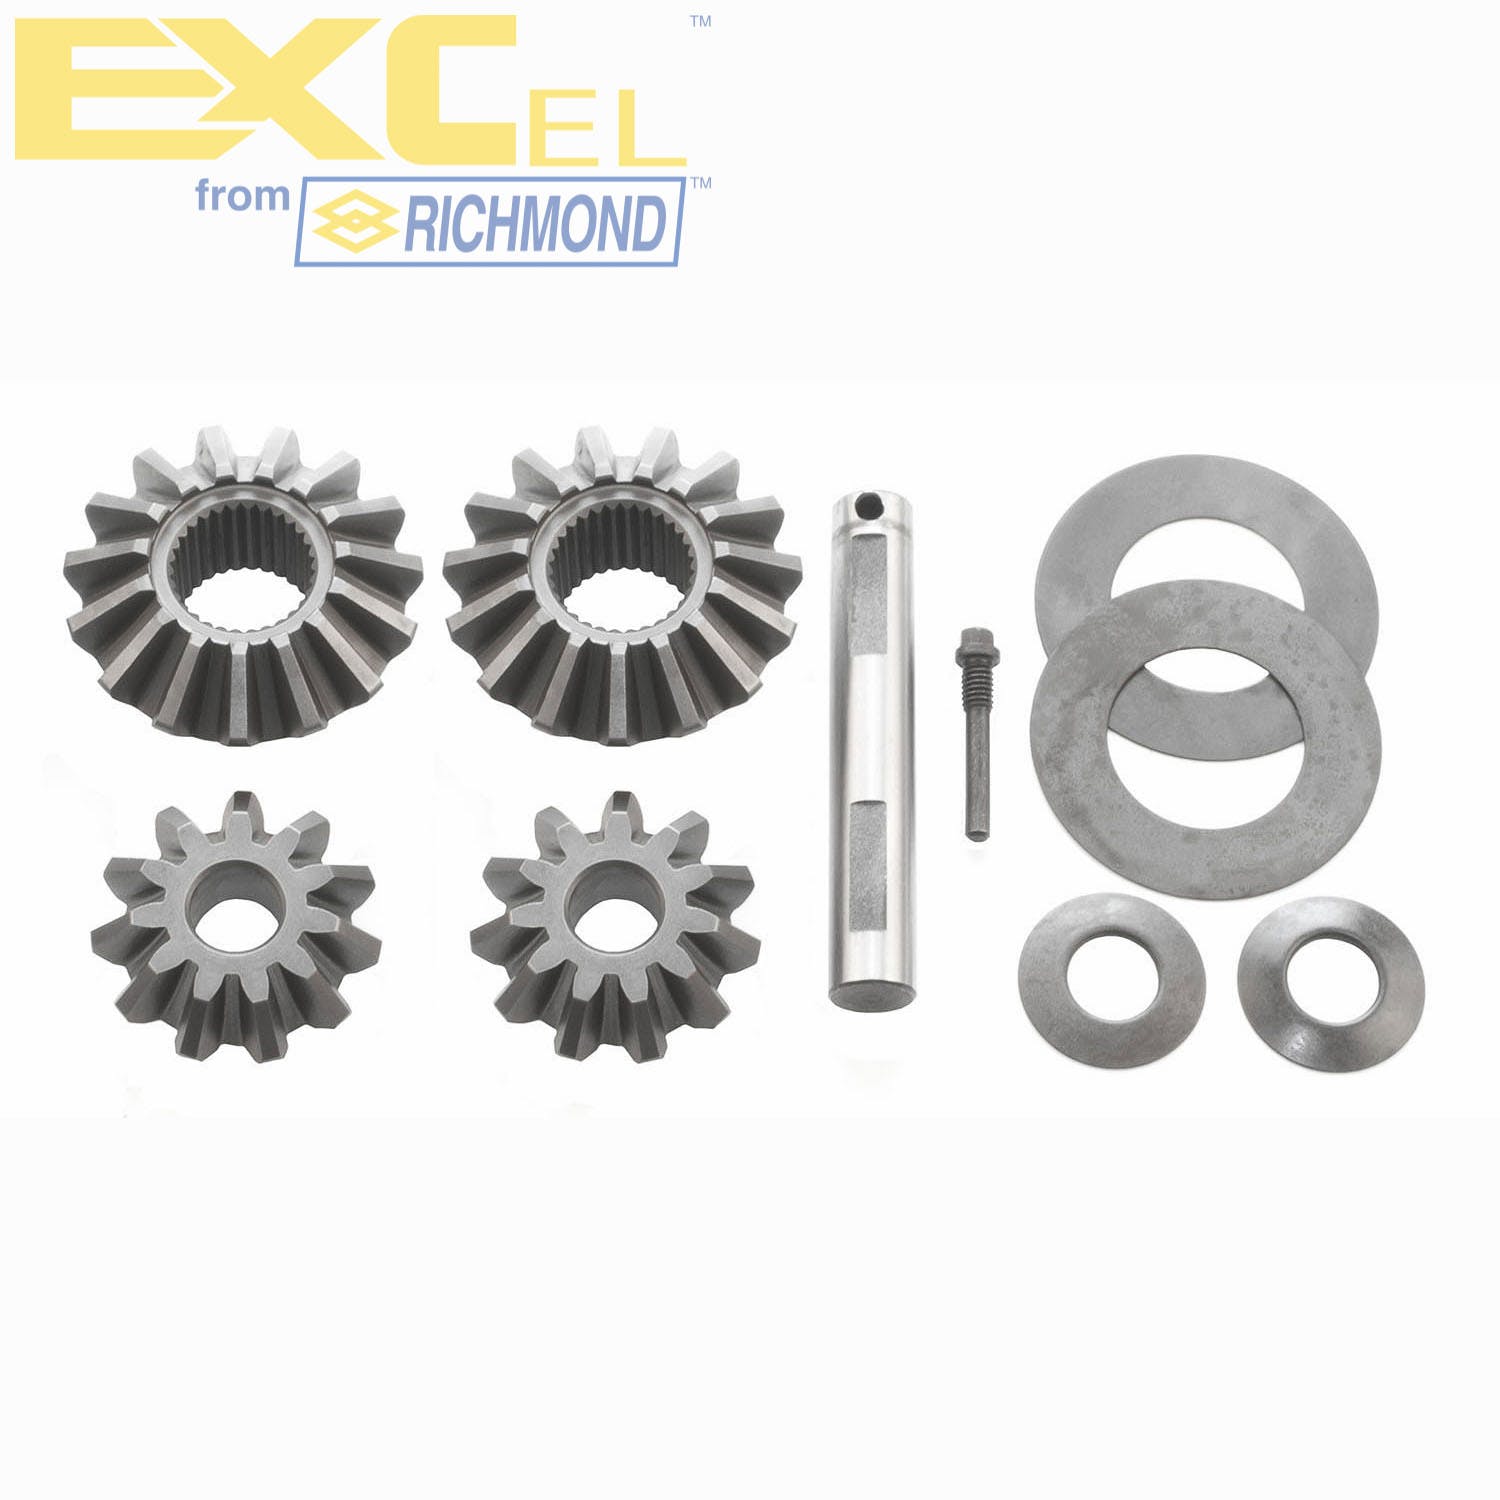 Excel XL-4050 Differential Carrier Gear Kit